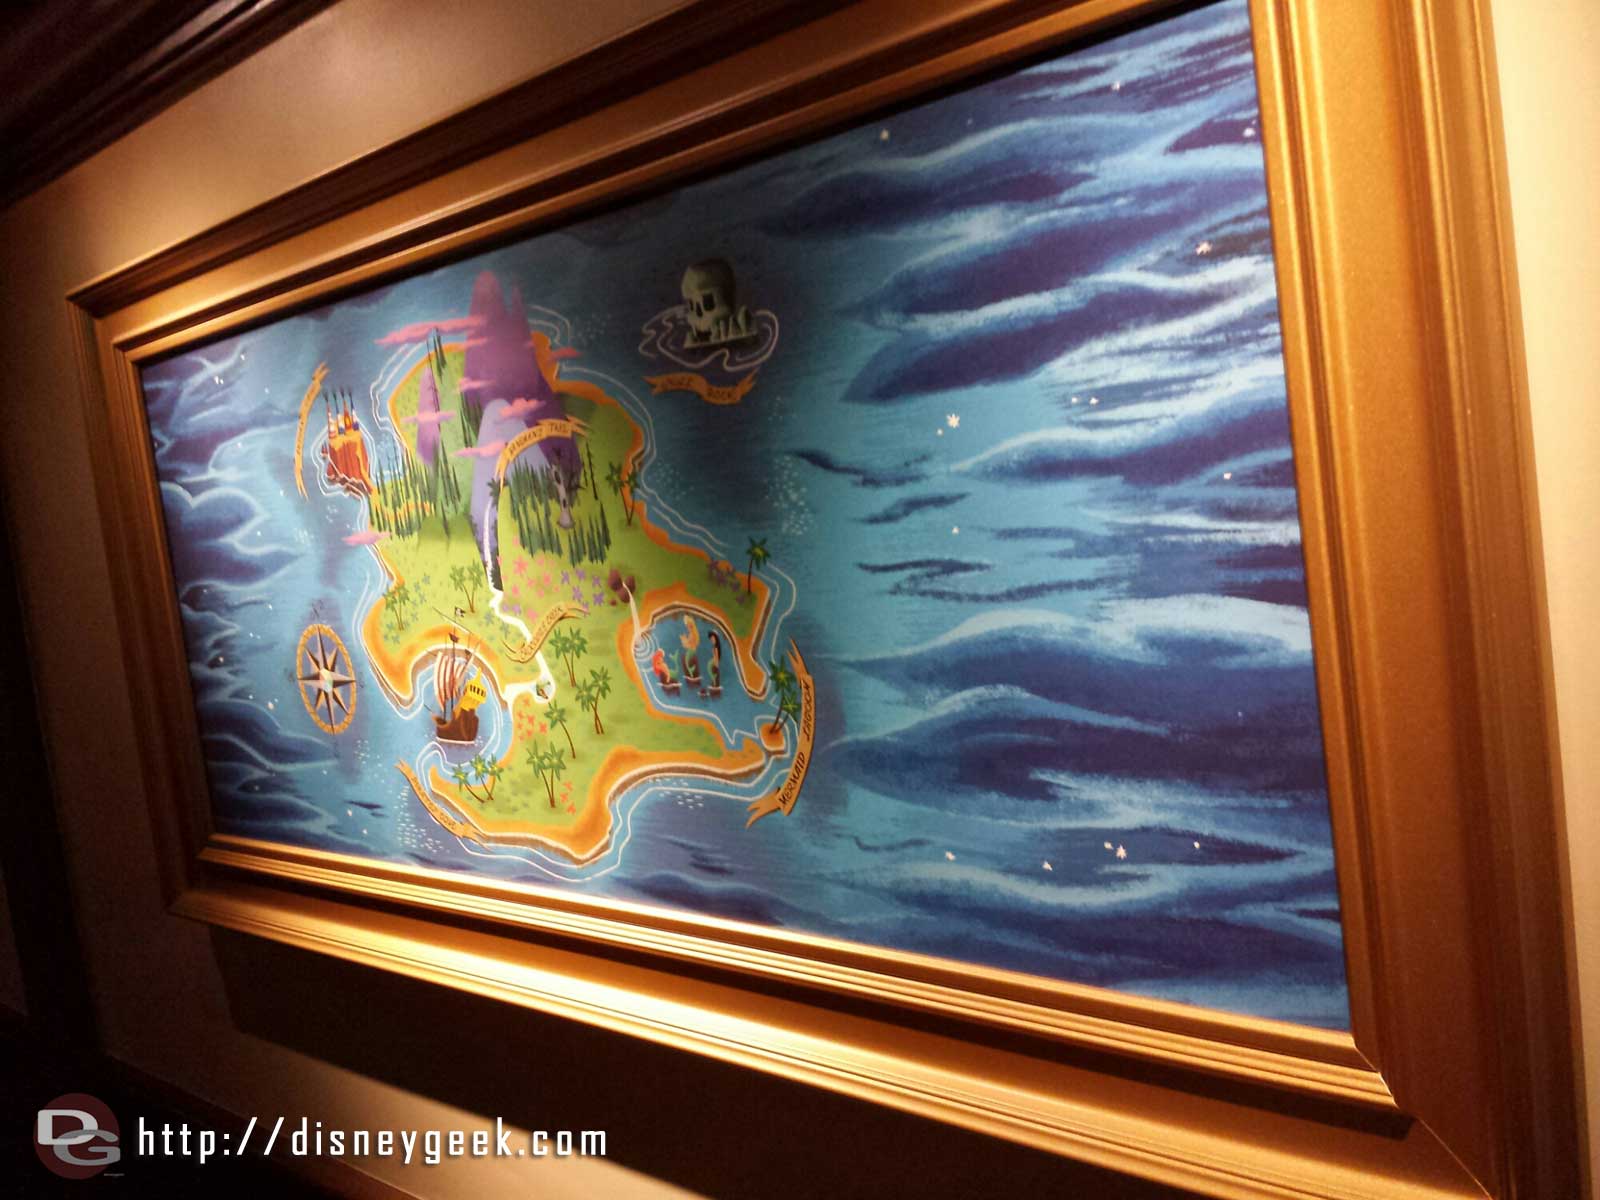 The new Peter Pan queue. The first section is an art gallery.